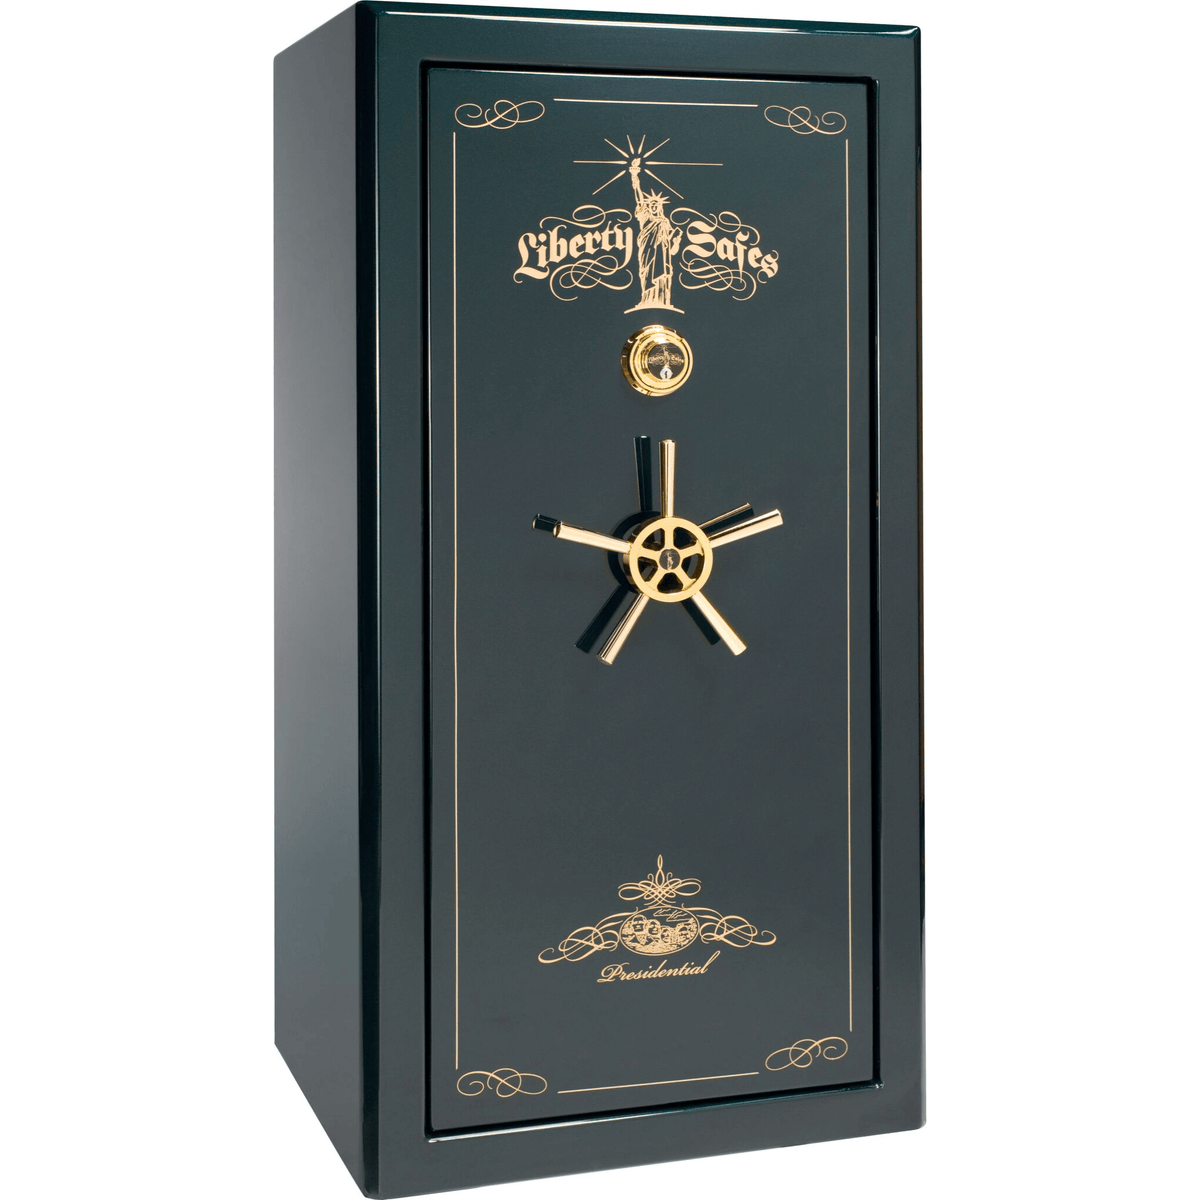 Presidential Series | Level 8 Security | 2.5 Hours Fire Protection | 25 | Dimensions: 60.5&quot;(H) x 30.25&quot;(W) x 28.5&quot;(D) | Green Gloss Gold Hardware | Mechanical Lock